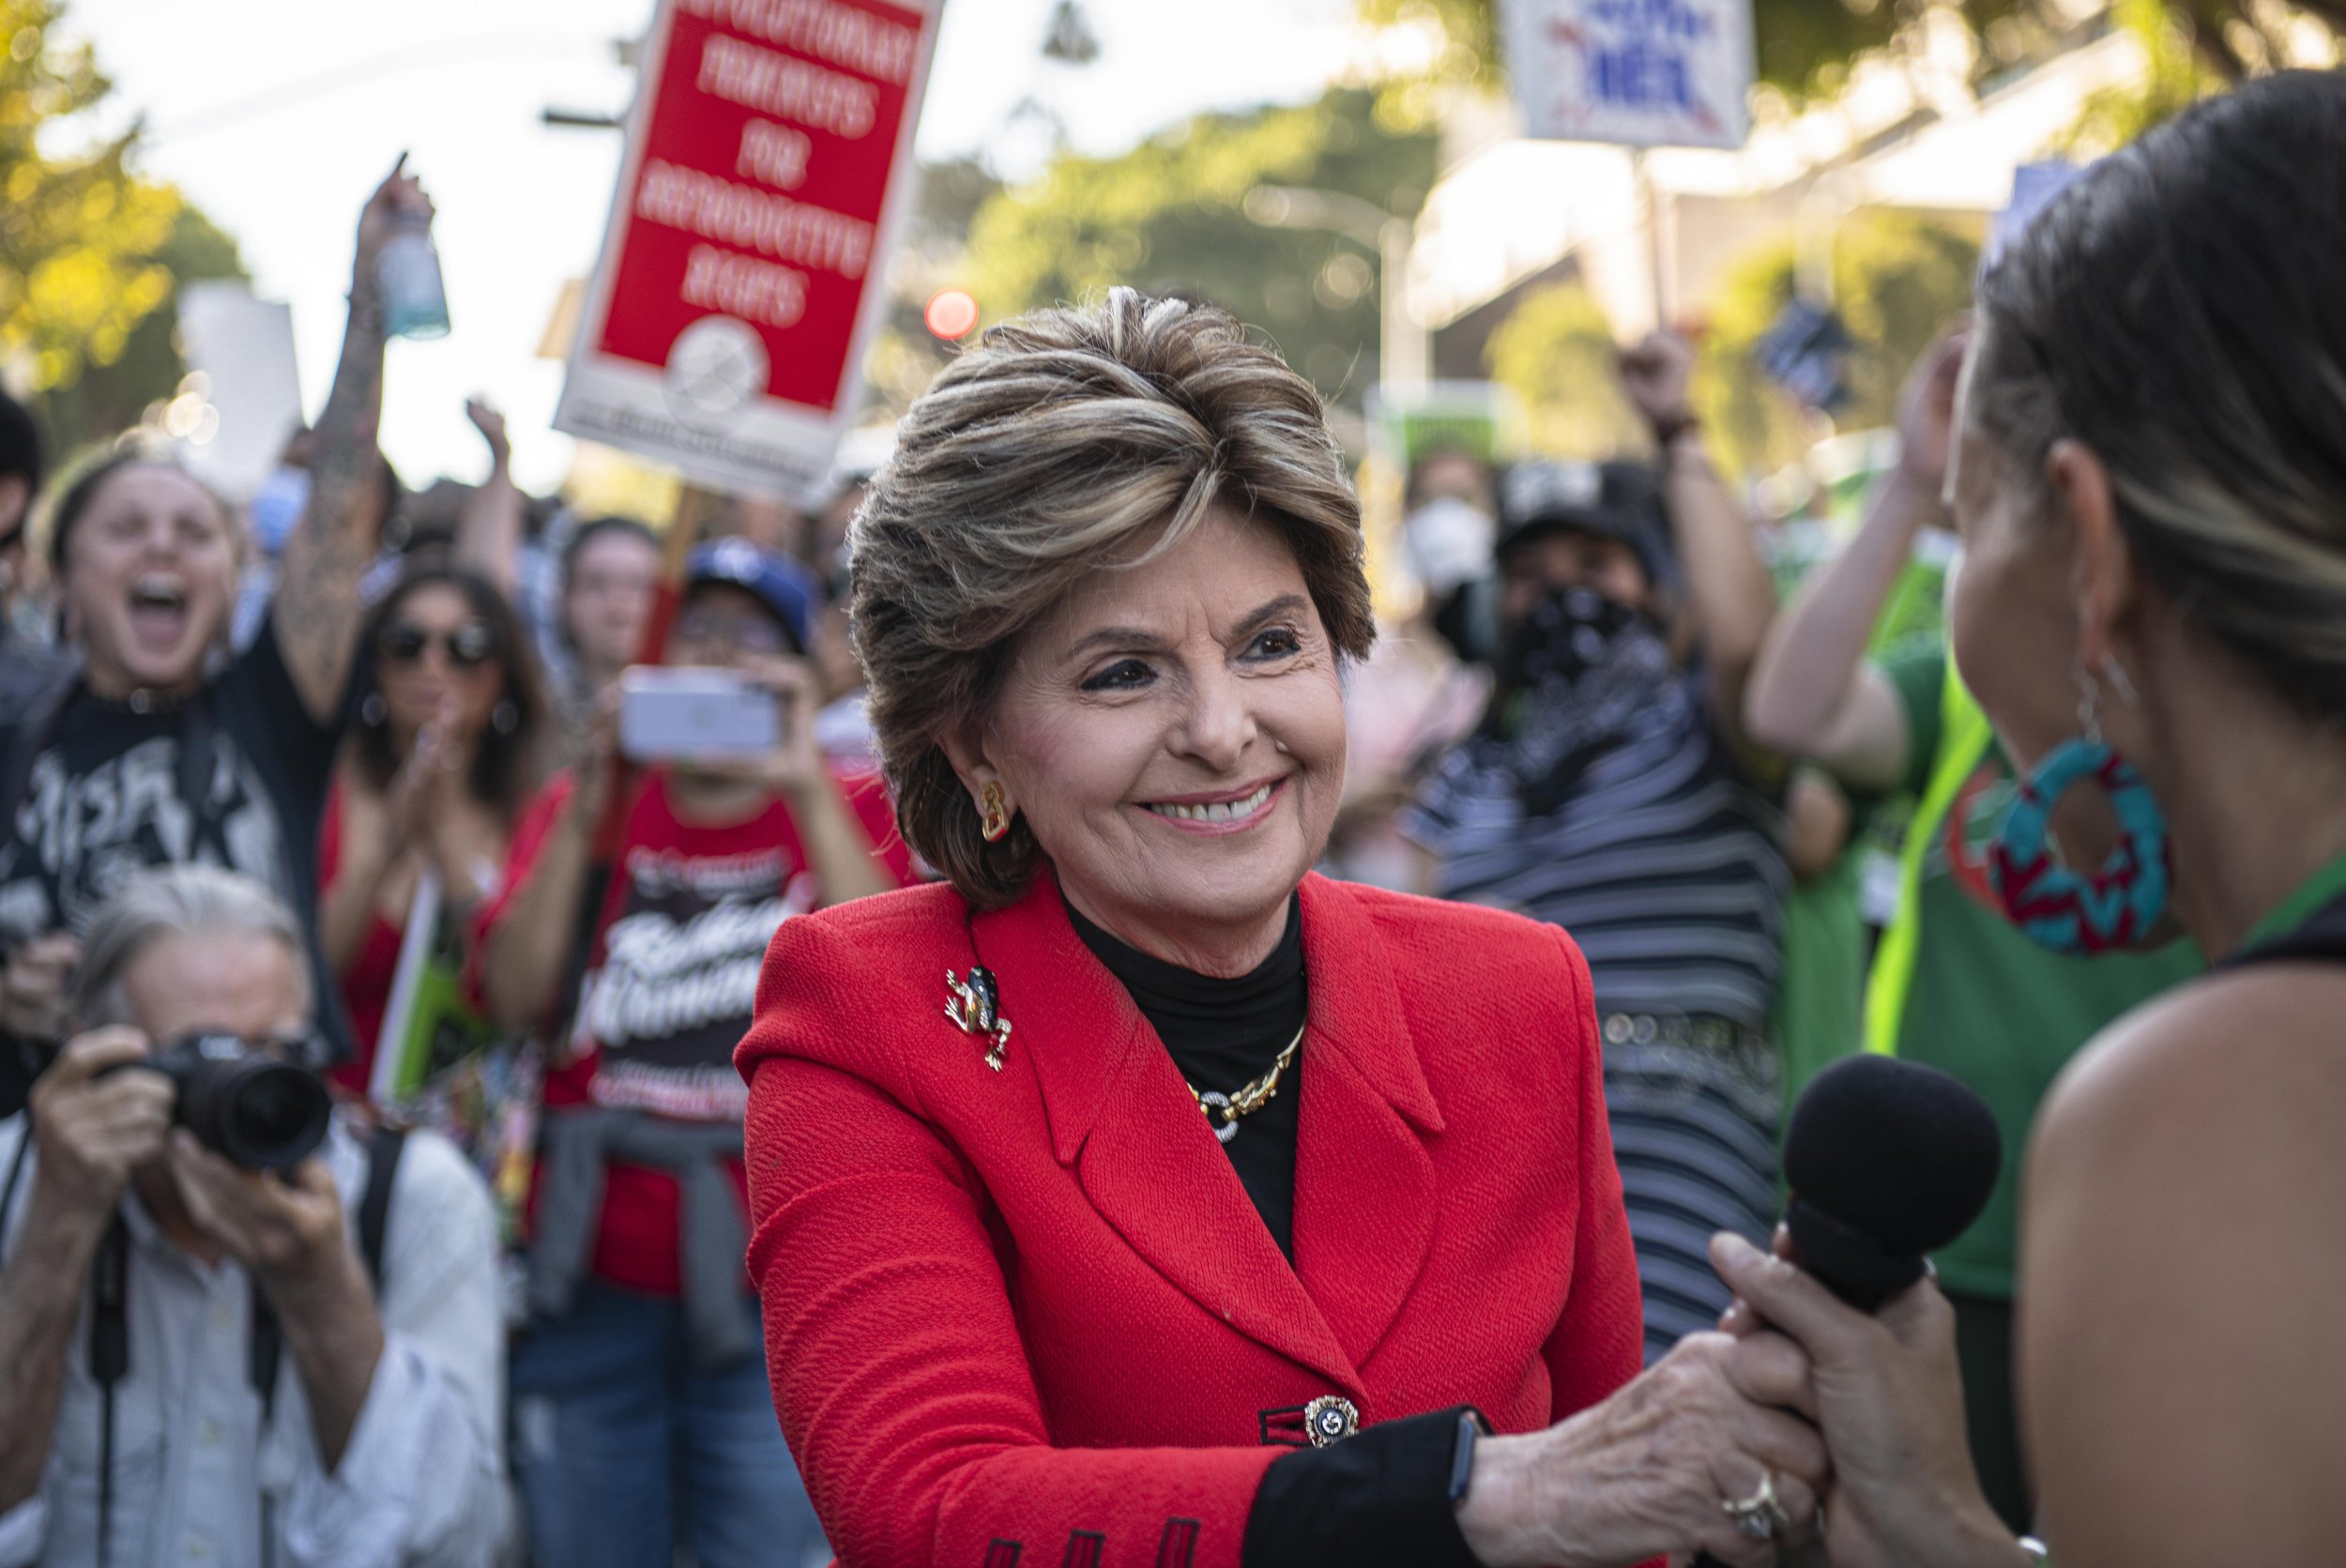  Gloria Allred, a high profile attorney known for taking contraversial cases involving Women's rights, speaks to the masses at the Abortions Rights rally. (Jon Putman | The Corsair) 